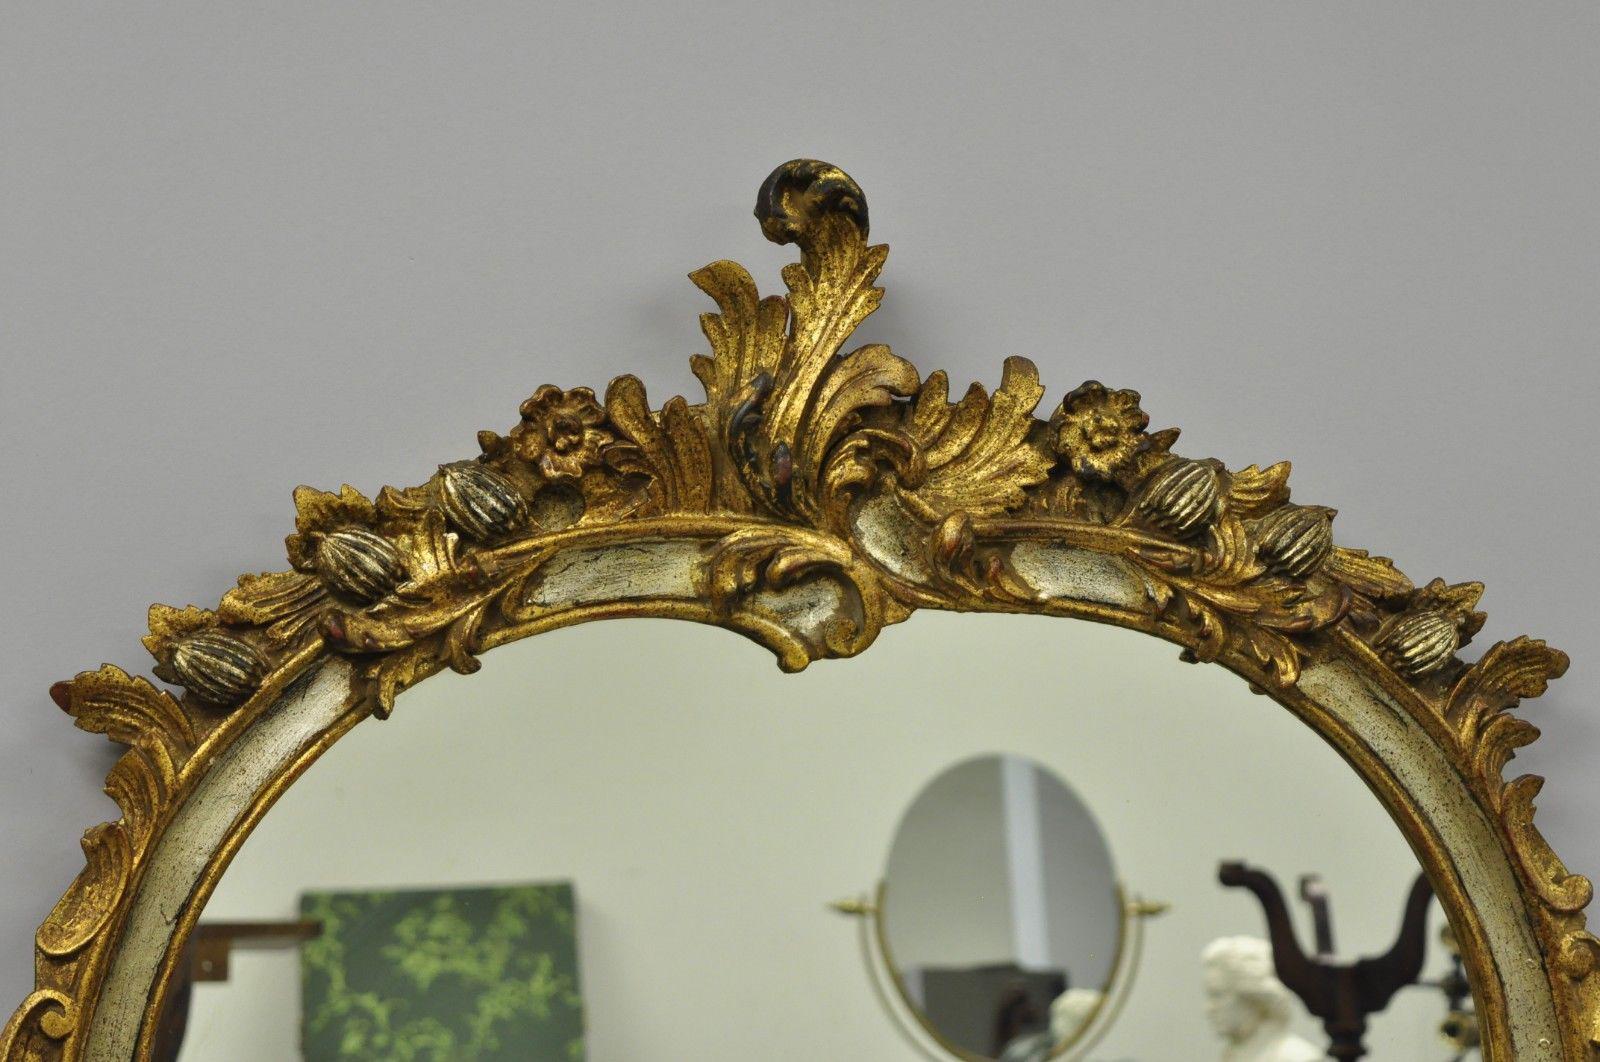 Louis XV French Rococo style gold and silver giltwood Italian trumeau mirror. item features gold and silver giltwood frame, leafy scrollwork, original label, great style and form, circa early 20th century. Measurements: 65